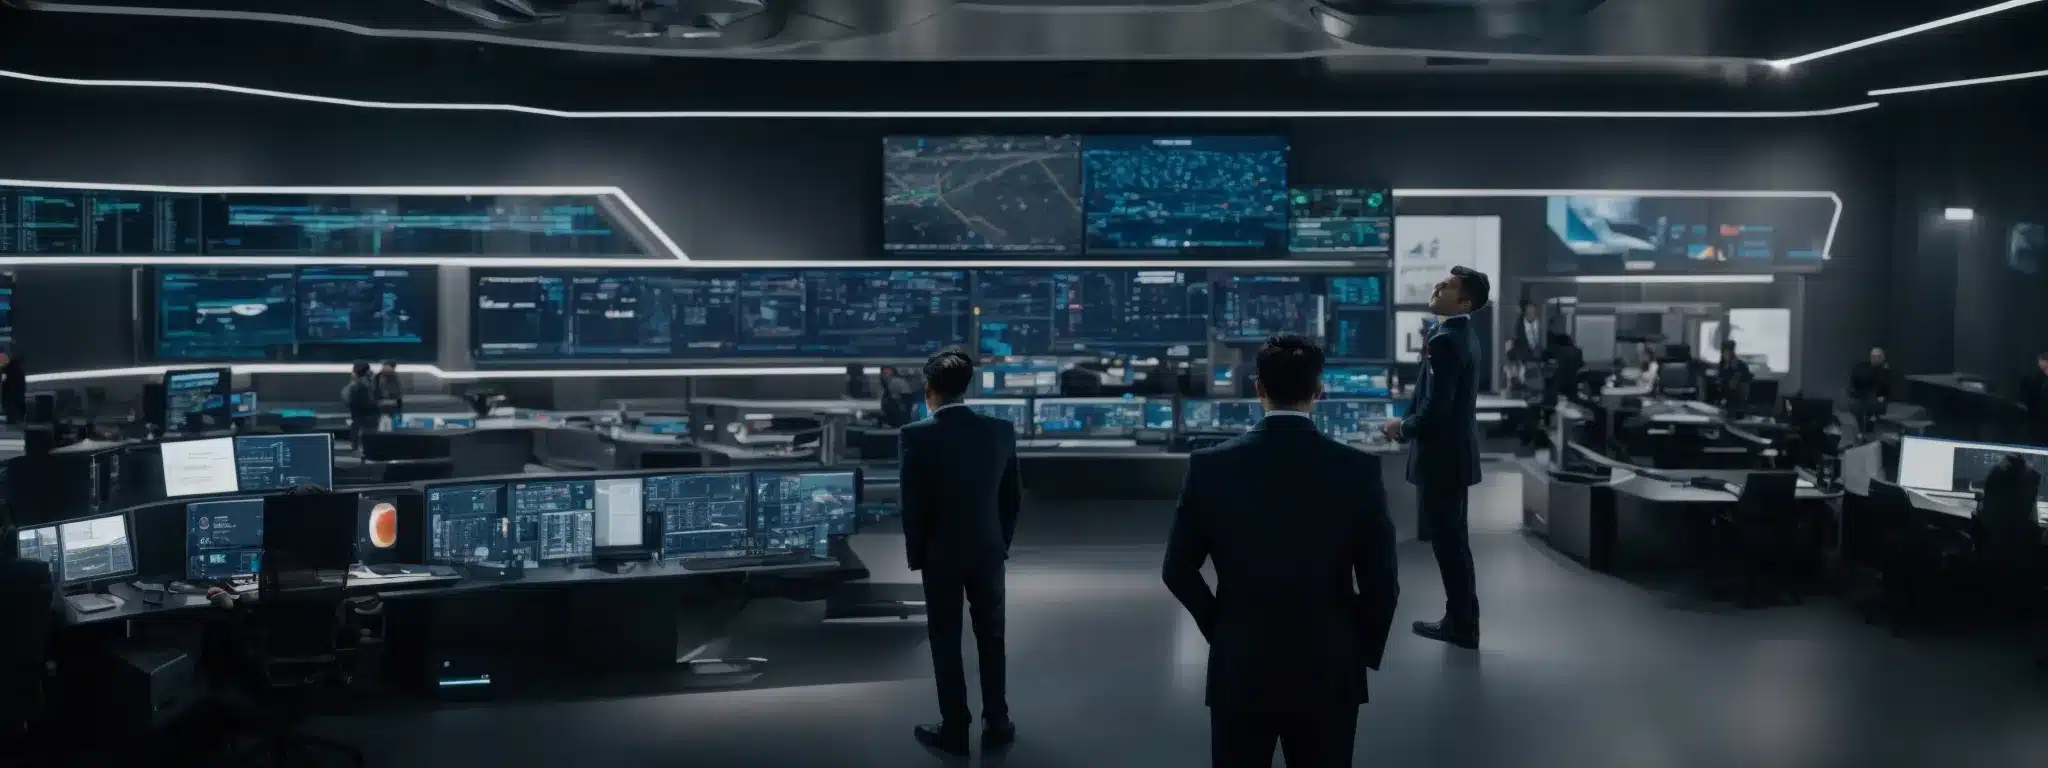 A Visionary Entrepreneur Stands At The Helm Of A Sleek, Futuristic Command Center, Directing A Team As They Integrate Advanced Technologies Into The Heart Of Their Next-Generation Product Line.